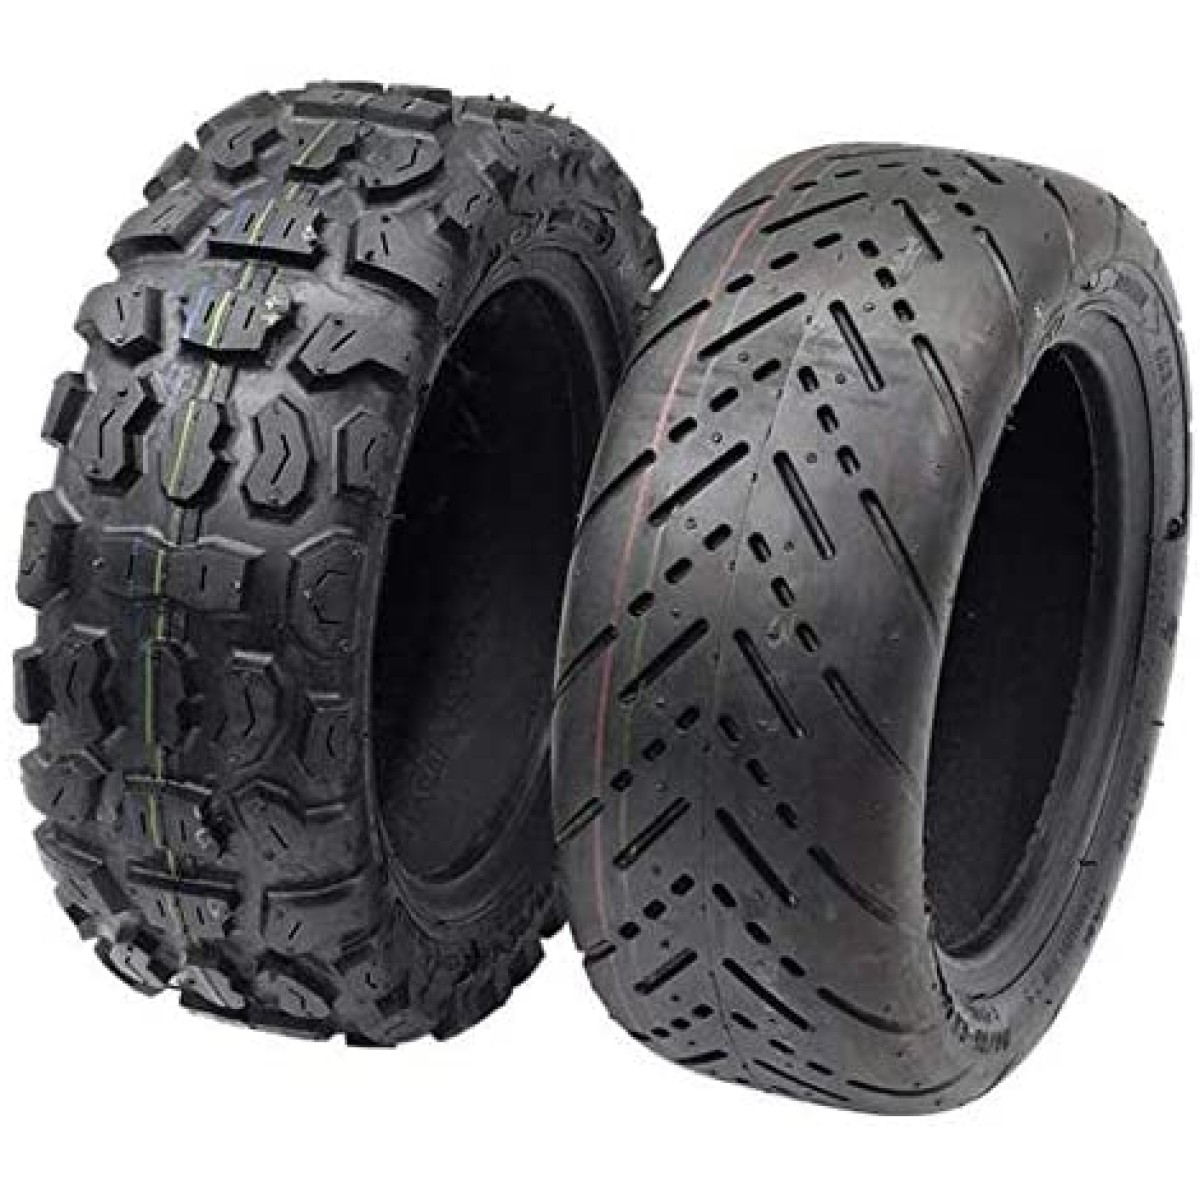 YUME ELECTRIC SCOOTER FOLDING TIRE FOR 11 INCH OFFROAD E SCOOTER